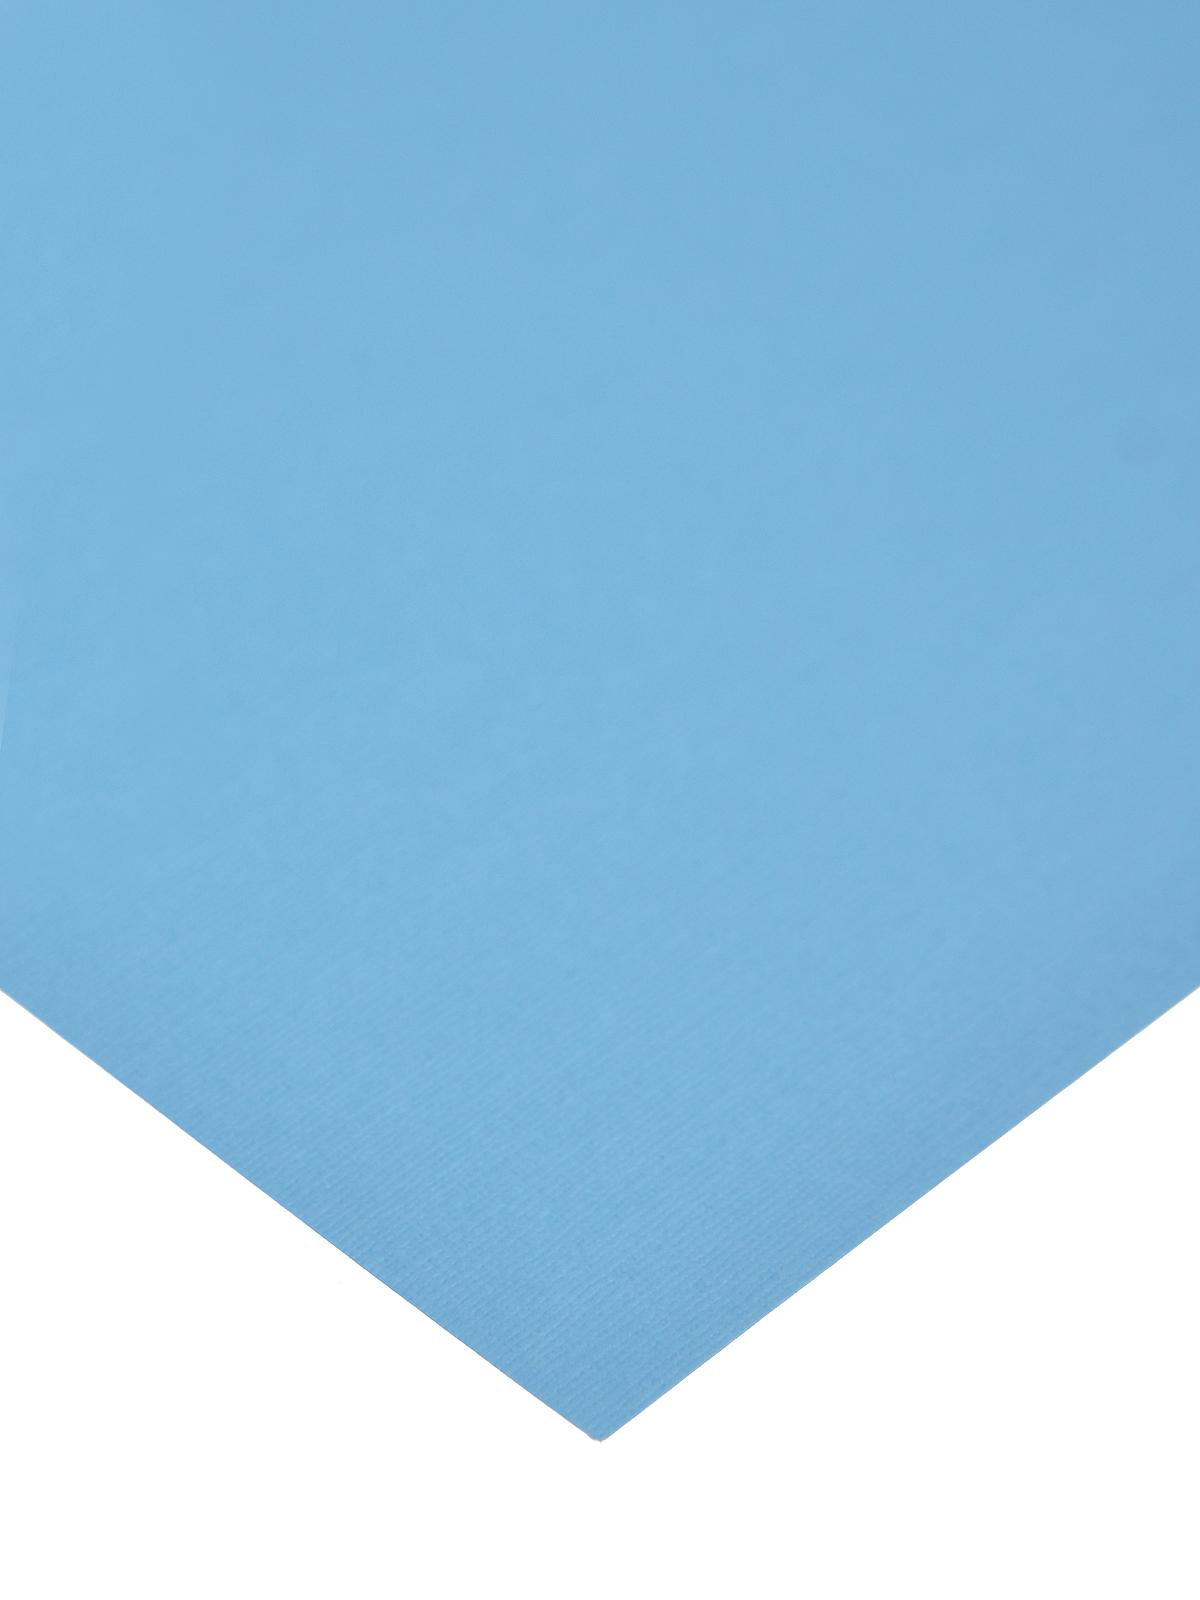 80 Lb. Canvas 8.5 In. X 11 In. Sheet Madras Blue